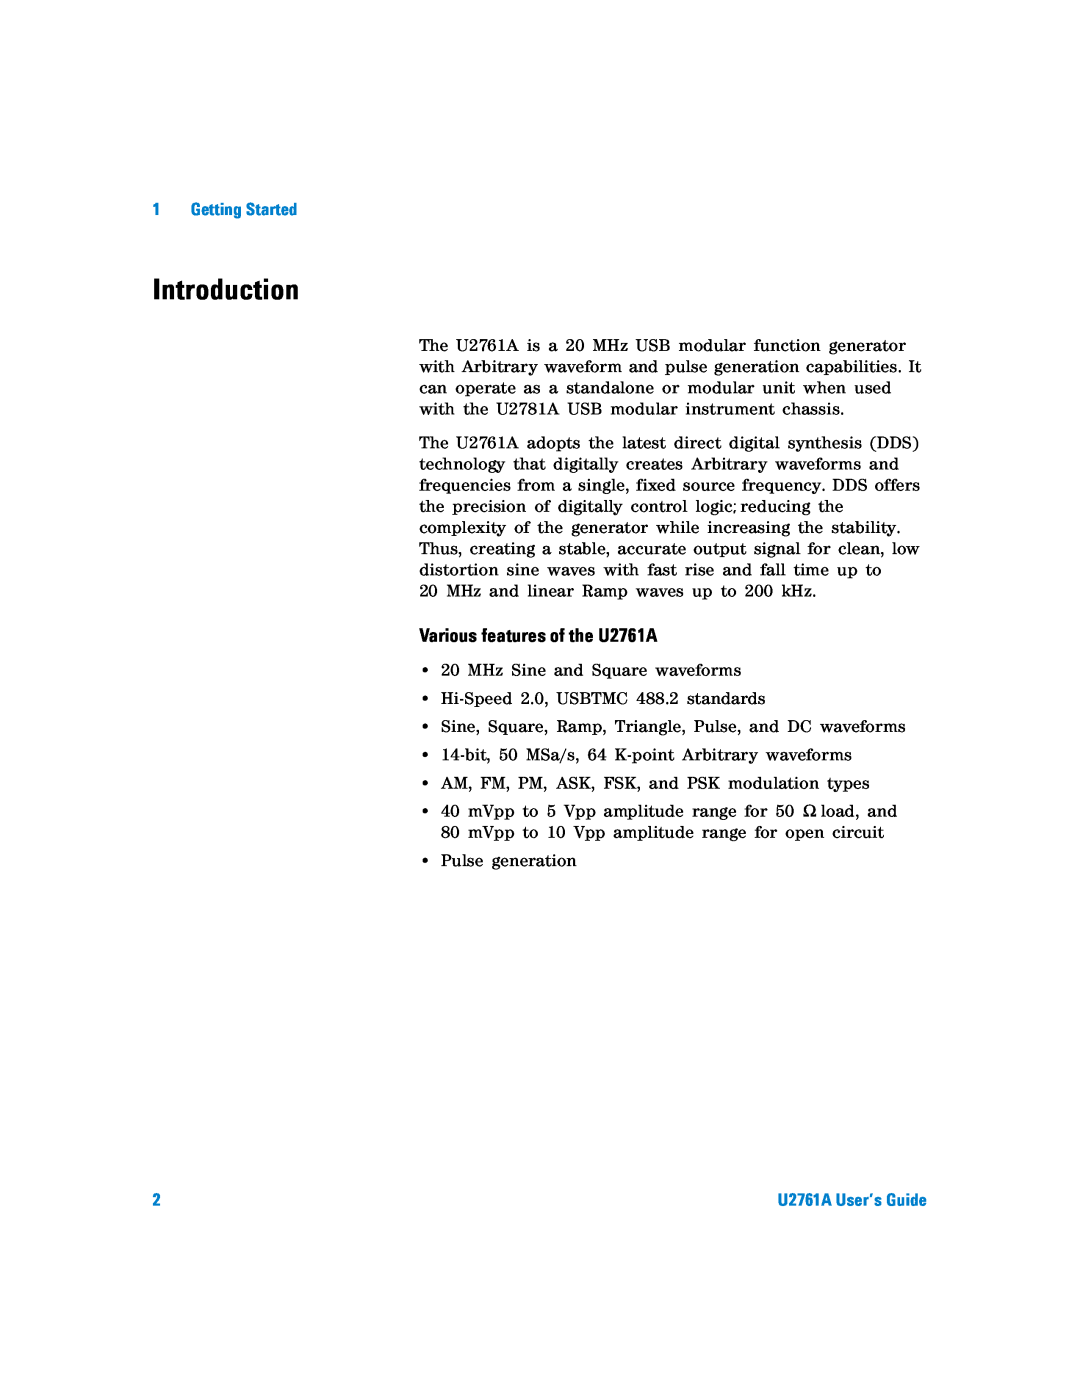 Agilent Technologies manual Introduction, Various features of the U2761A, Getting Started 